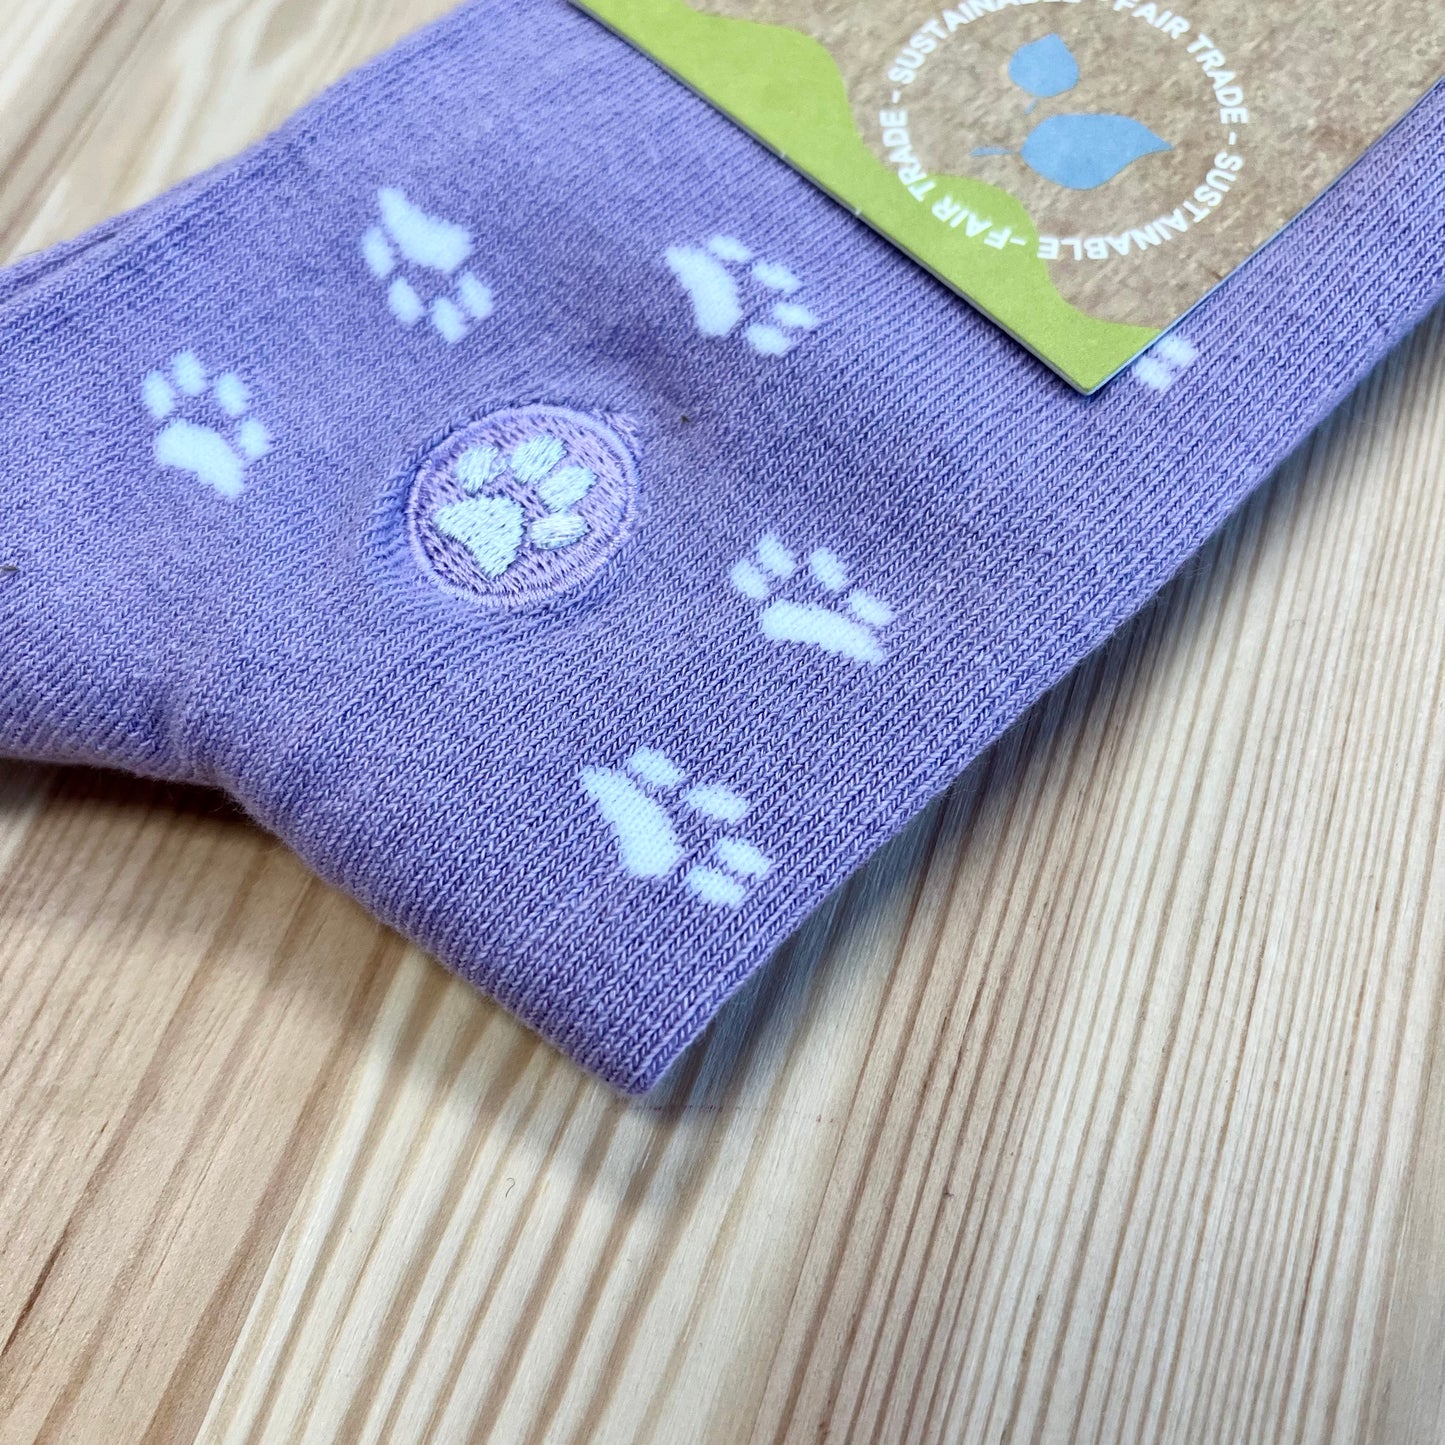 Socks that Save Dogs